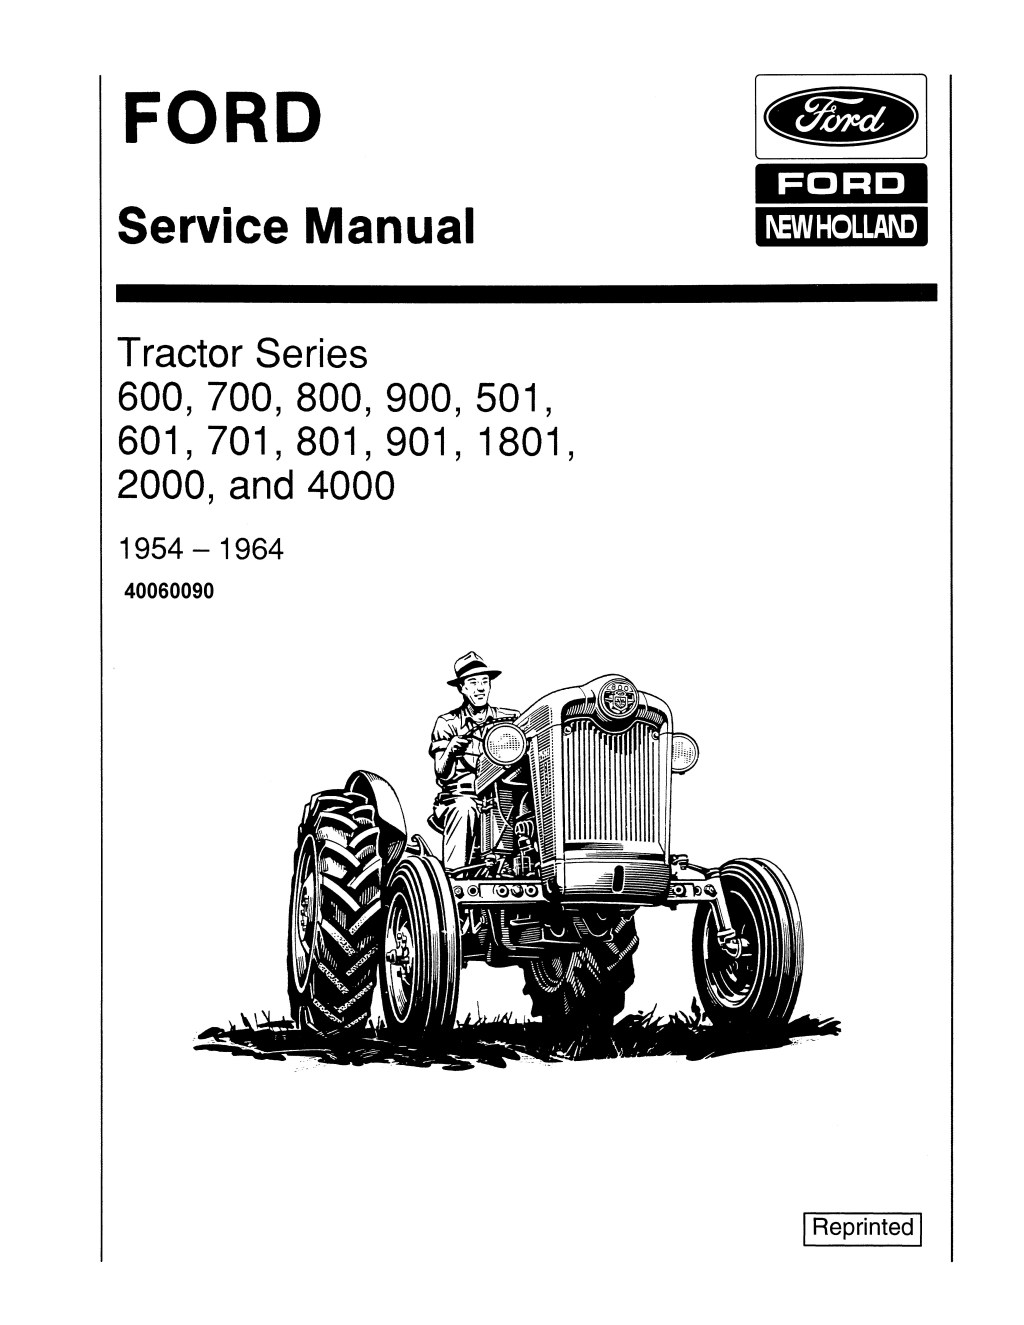 Picture of: Ford  Tractor (-) Service Repair Manual by